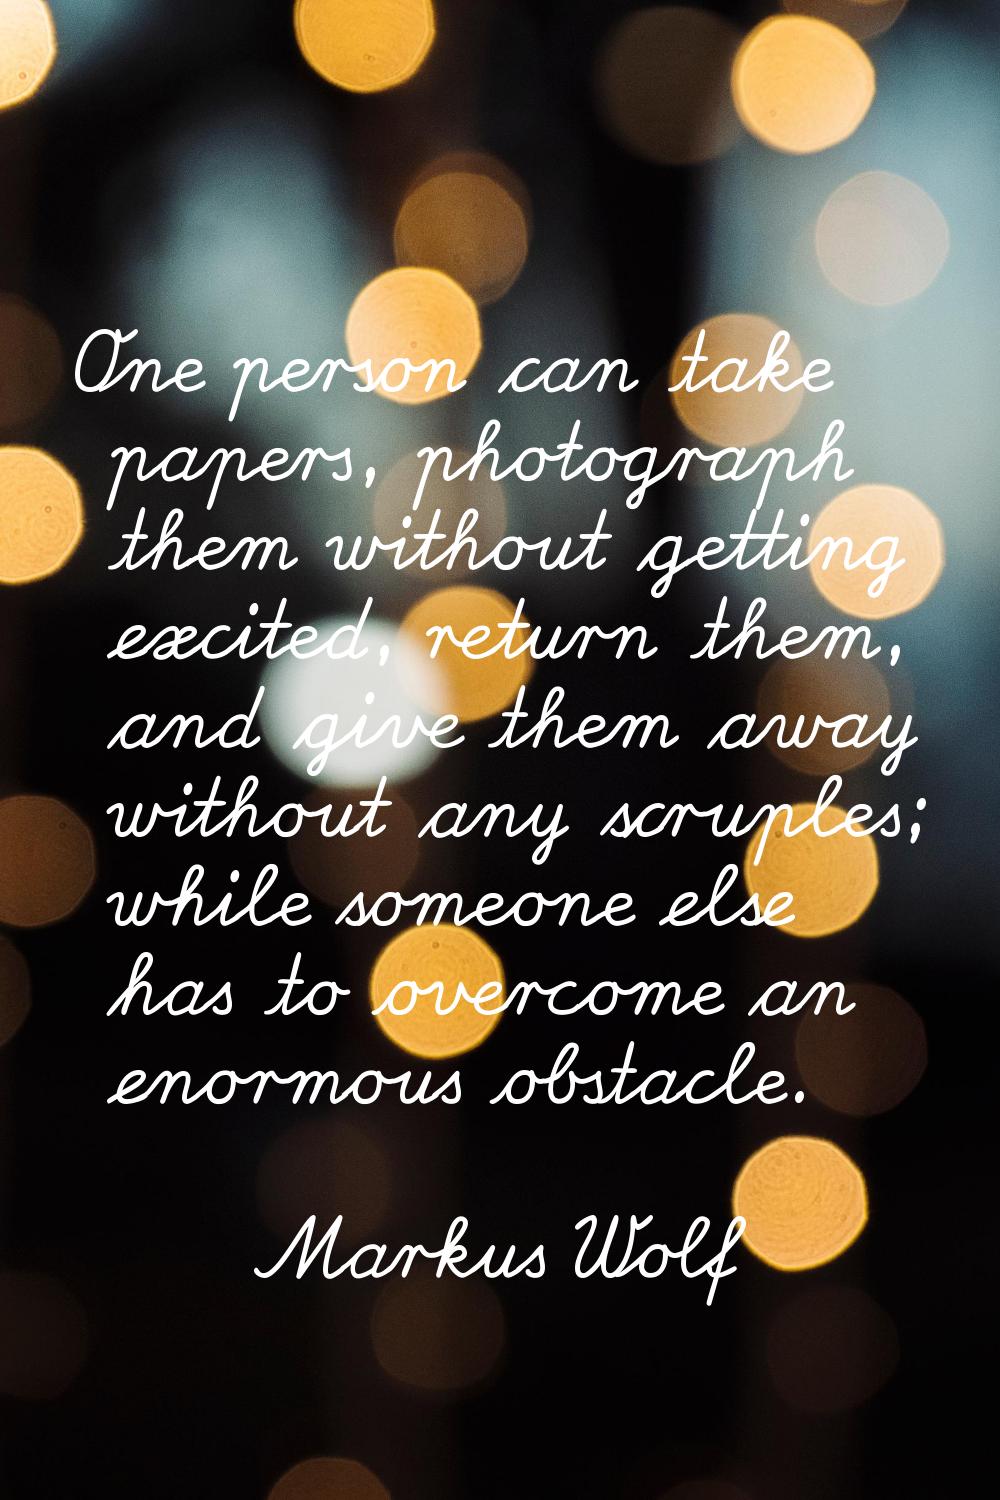 One person can take papers, photograph them without getting excited, return them, and give them awa